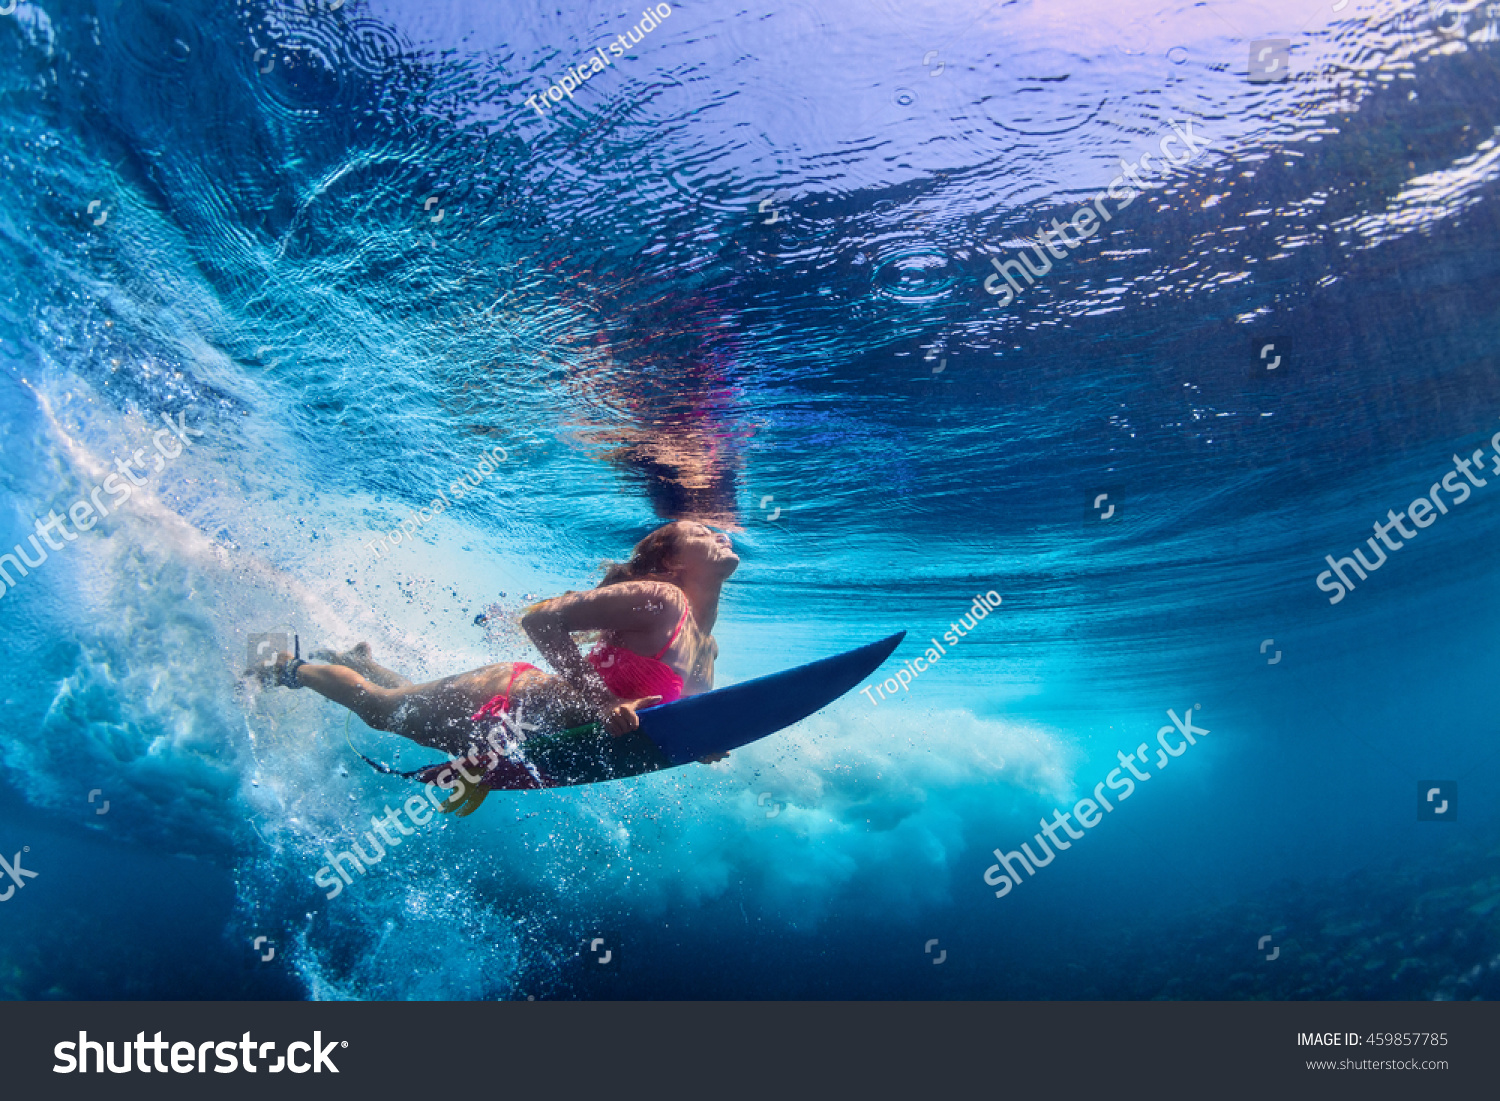 Young girl wearing bikini in action - surfer with surf board dive underwater under ocean wave. Family lifestyle, people water sport adventure camp and beach extreme swim on summer vacation with child. #459857785